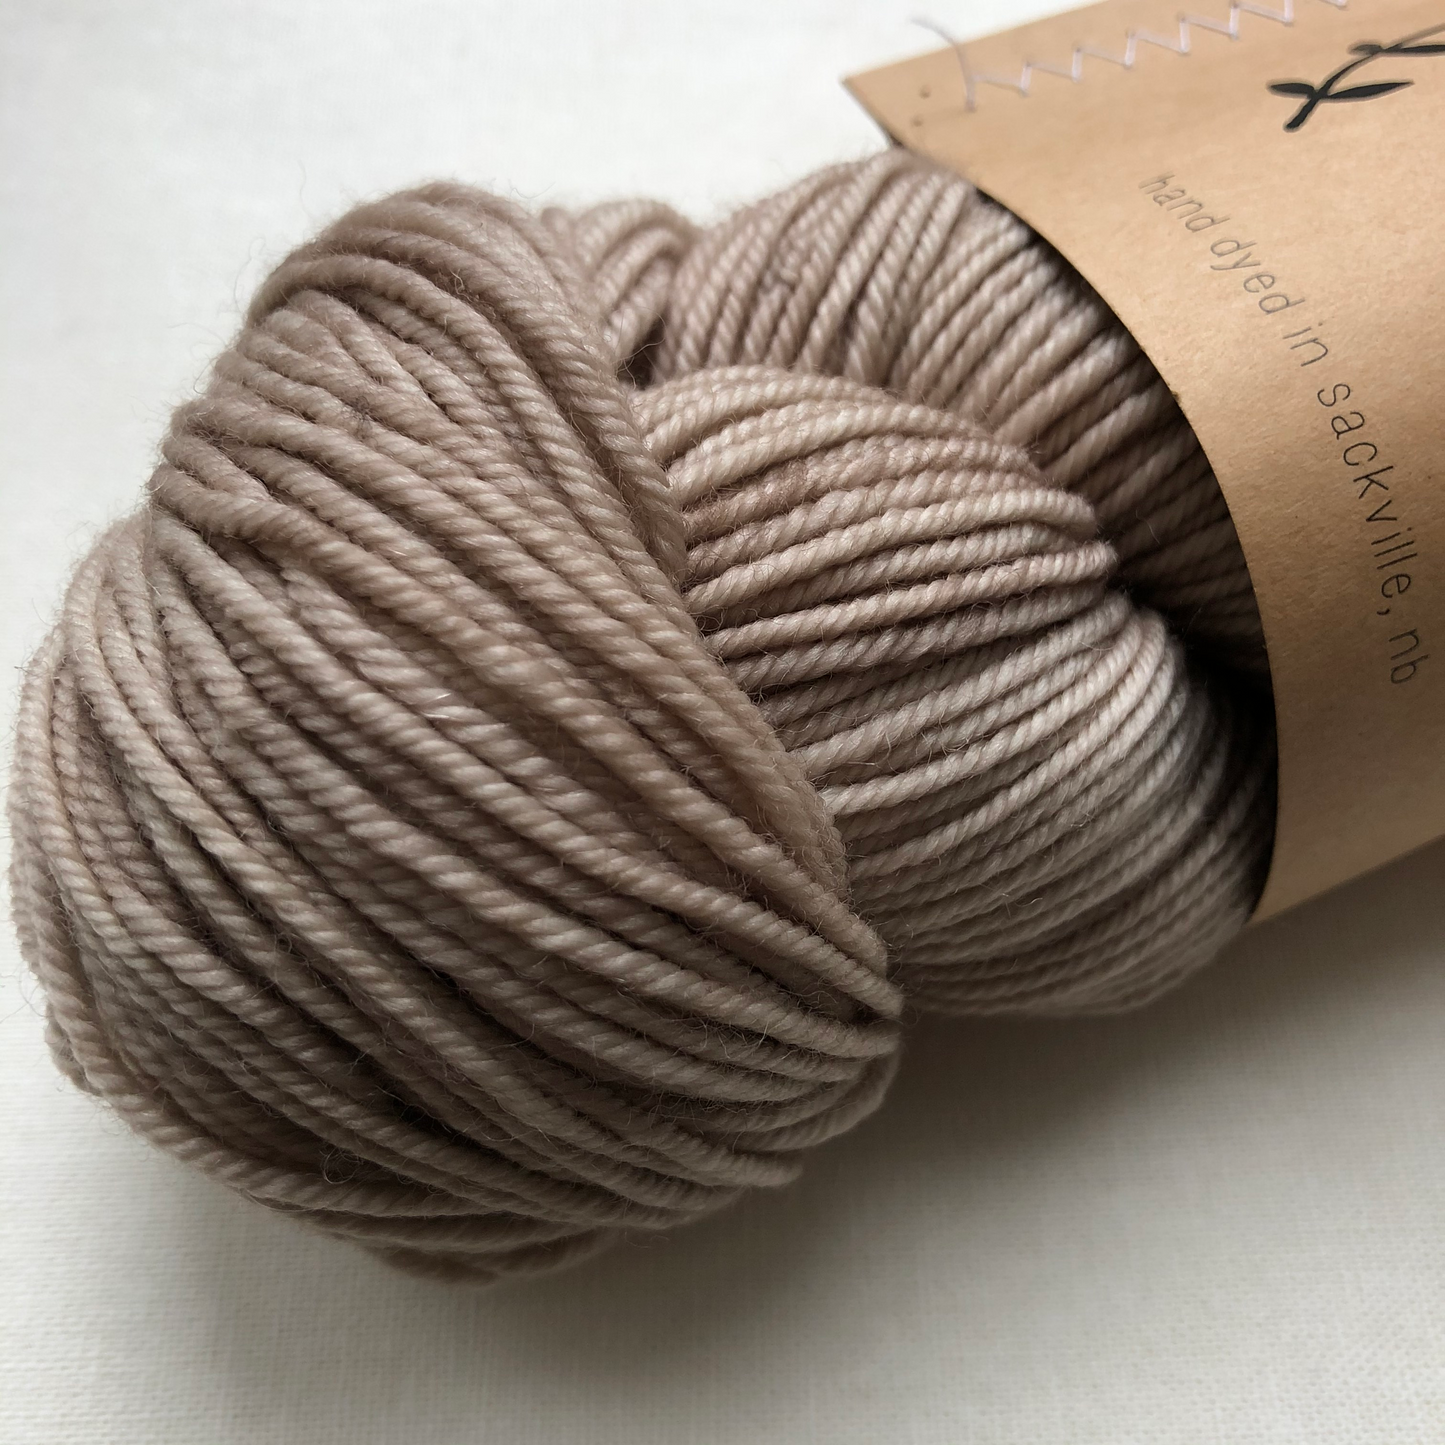 Merino Worsted, Linen, Lichen and Lace